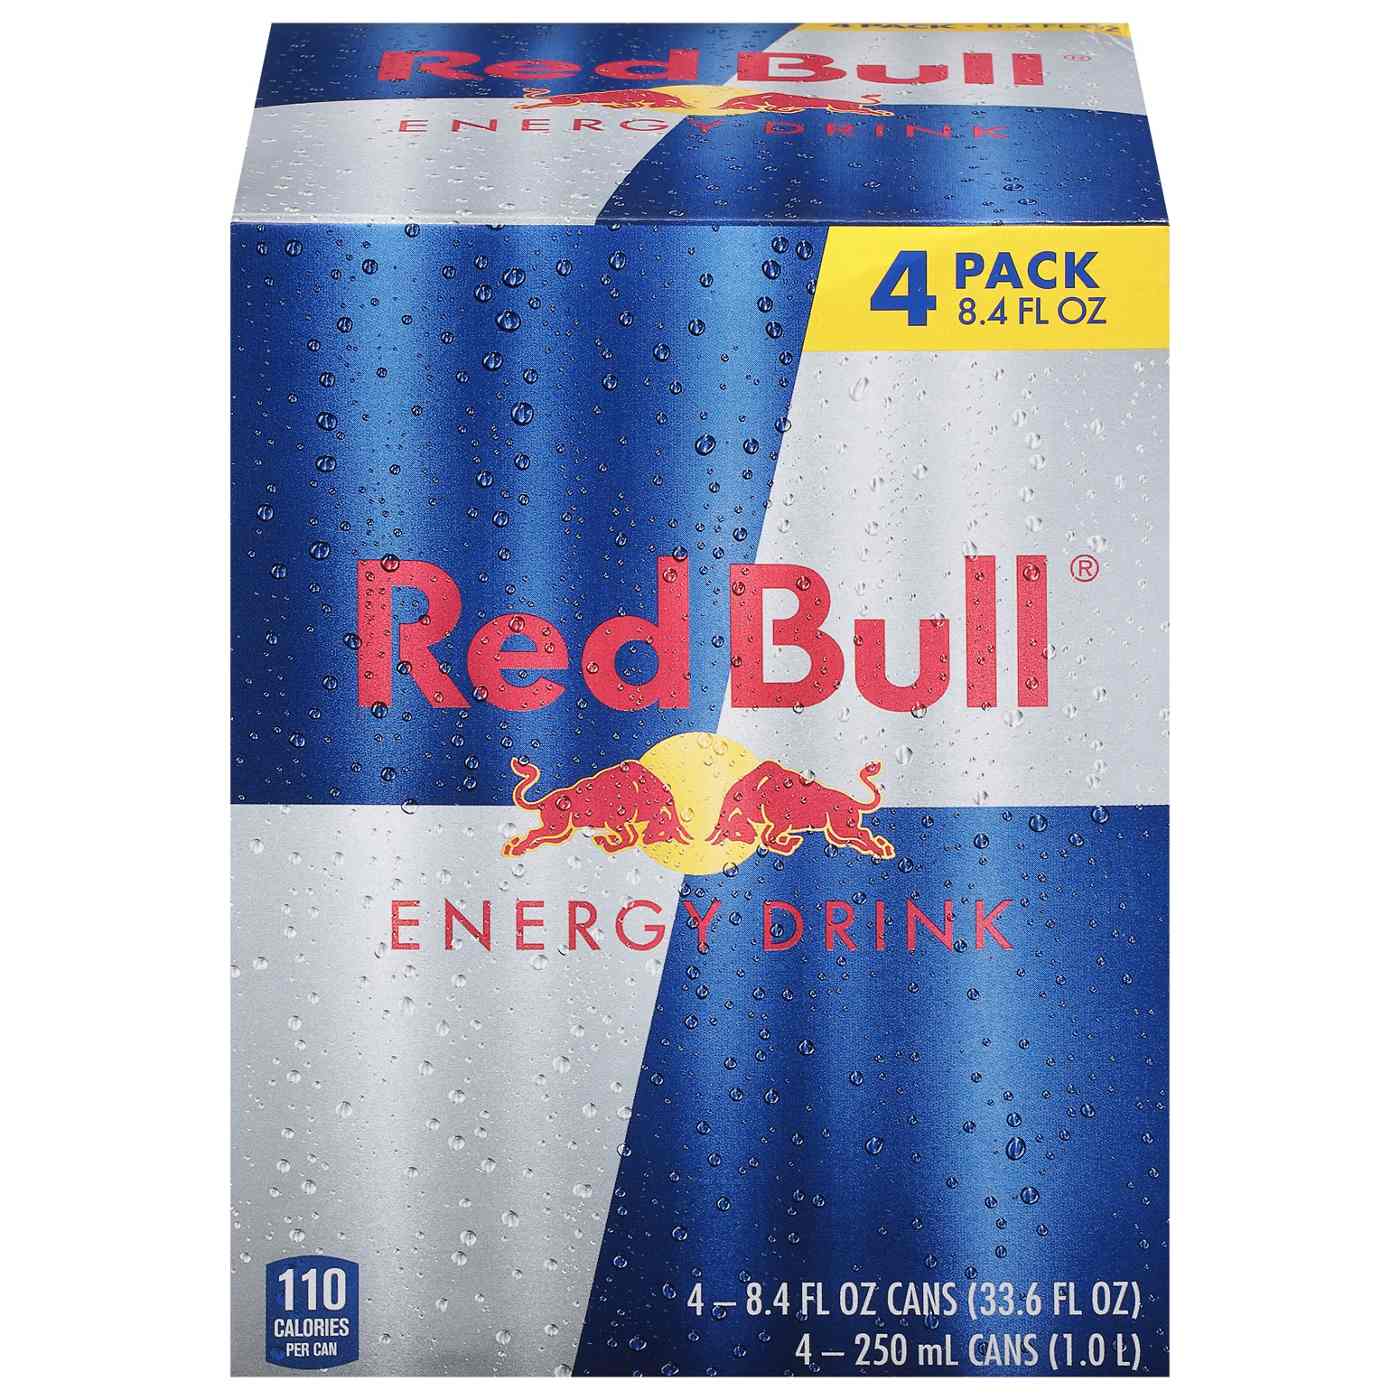 Red Bull Energy Drink 4 pk Cans; image 1 of 7